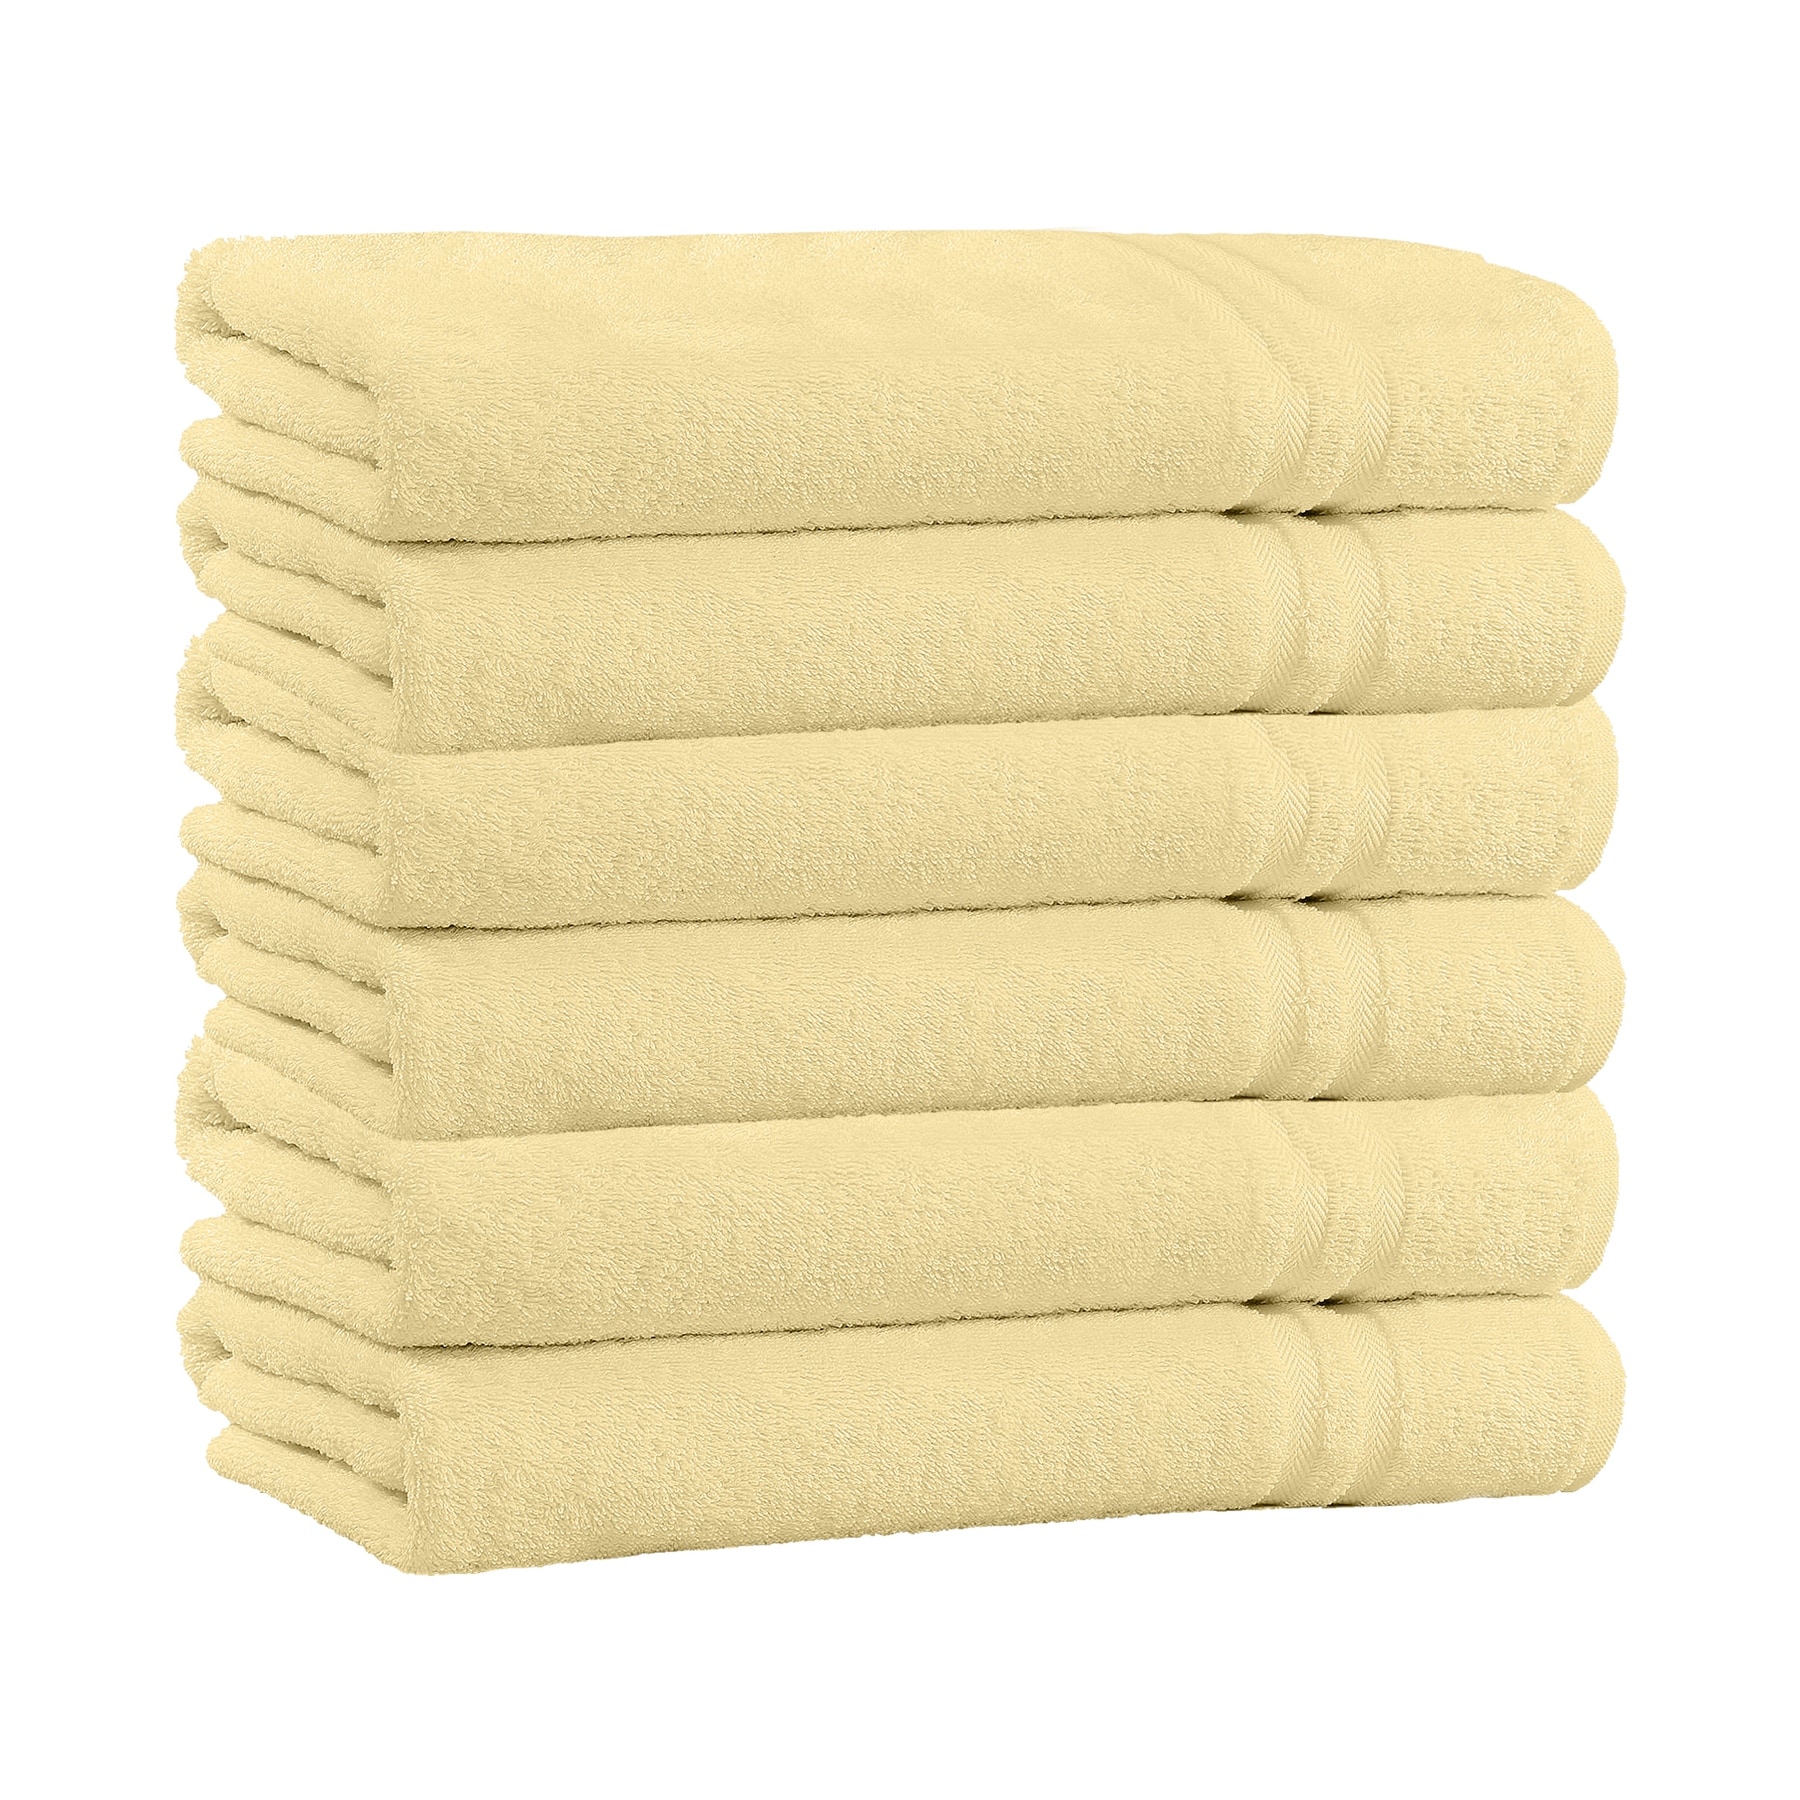 https://ak1.ostkcdn.com/images/products/is/images/direct/538f02caefcfff93c8890d1ce2d037ba209e1e40/5-Pack-100%25-Cotton-Extra-Plush-%26-Absorbent-Bath-Towels.jpg